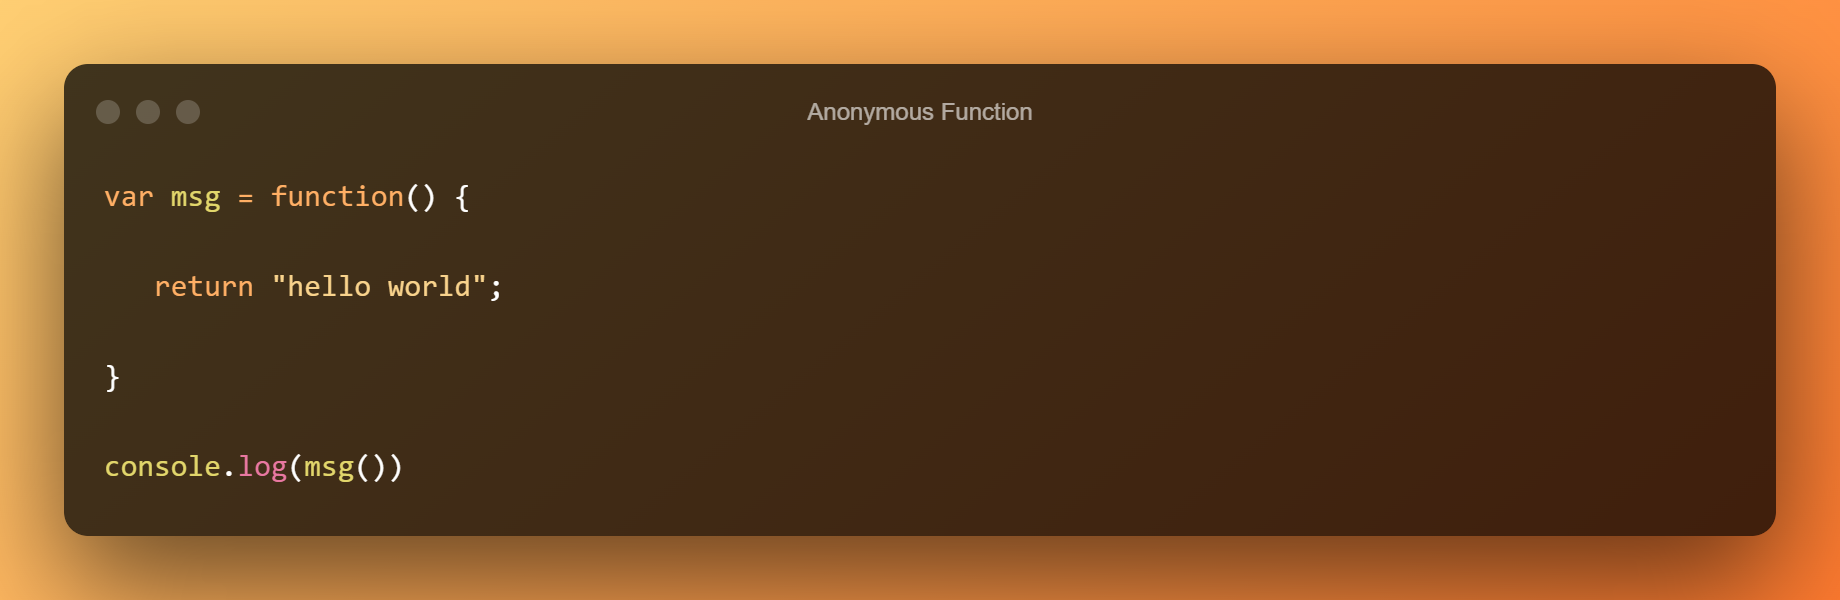 Anonymous Function